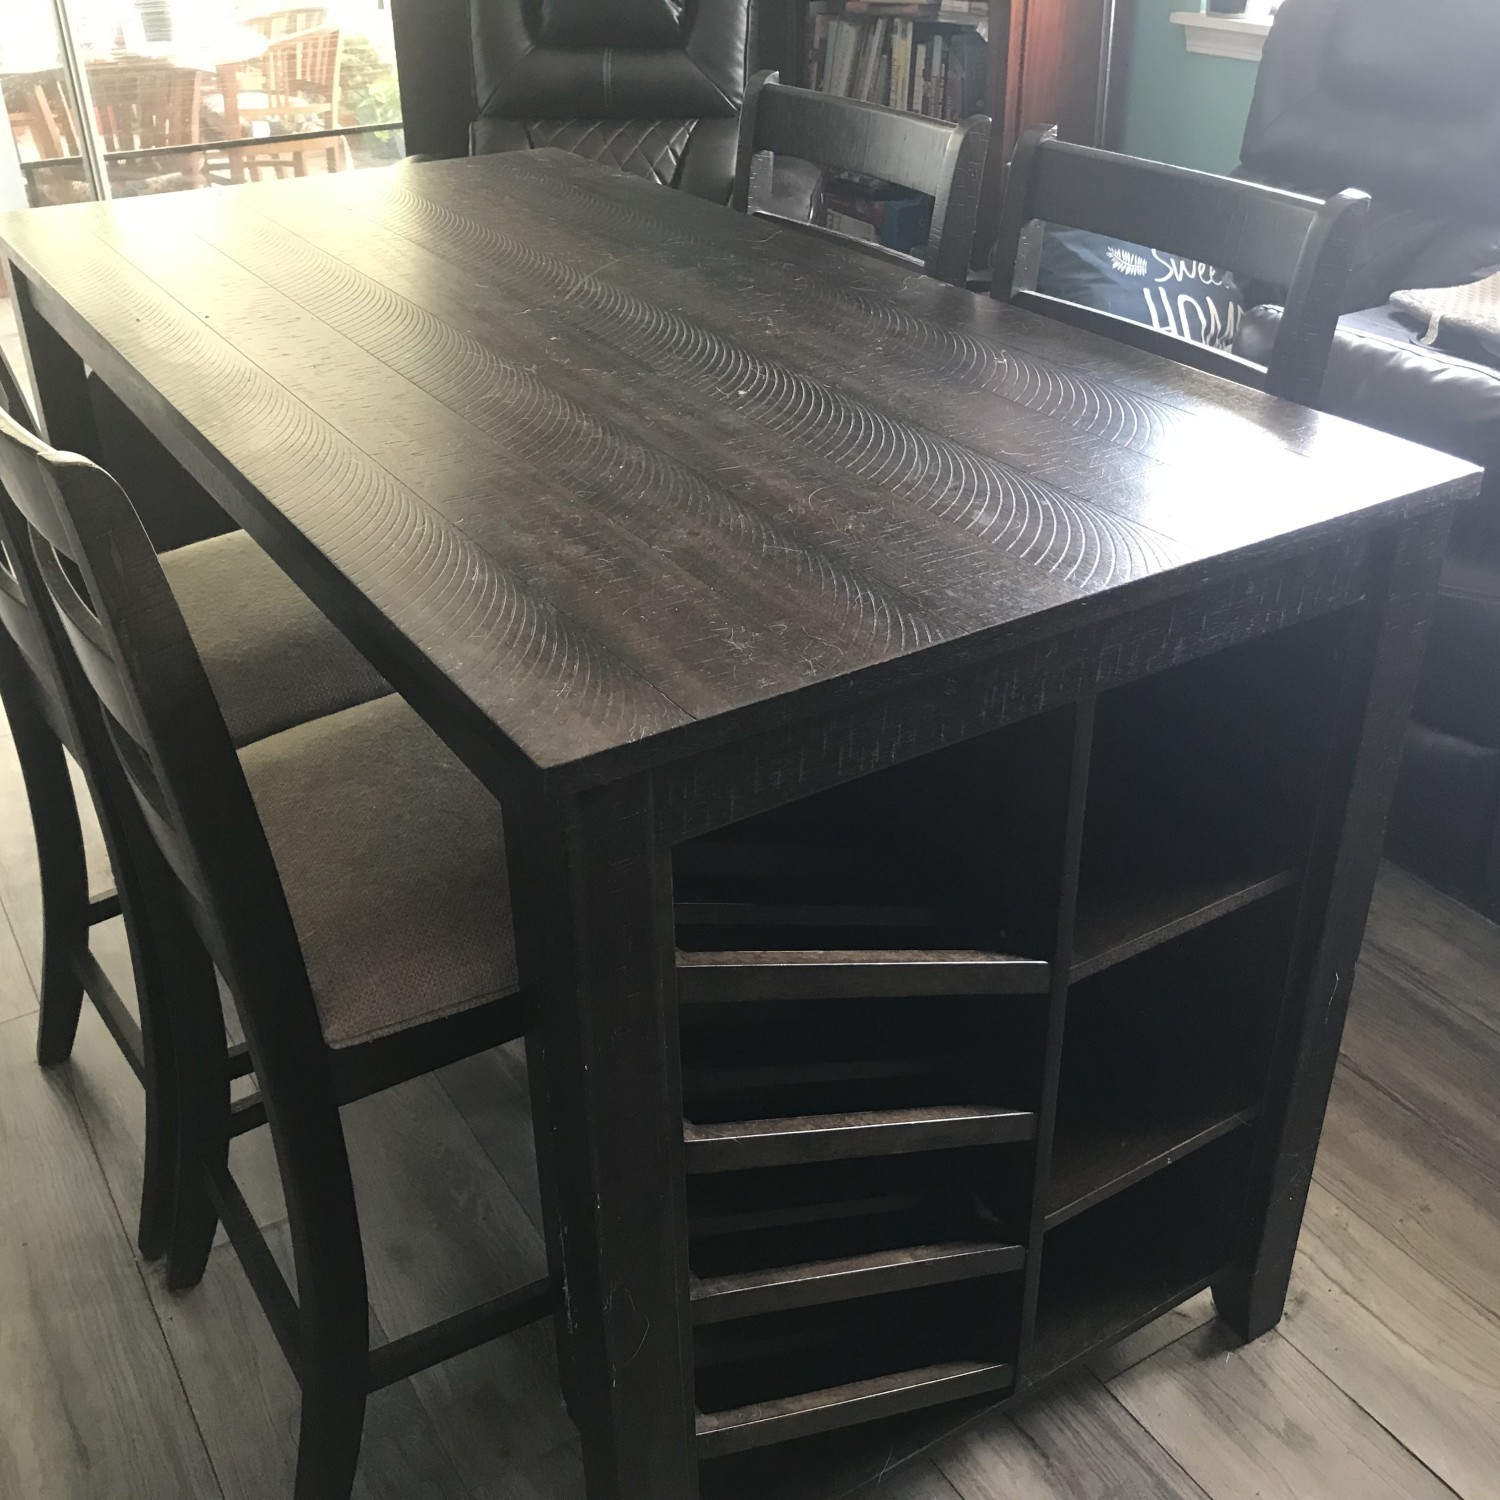 Dining room table with wine cab. 4 chairs